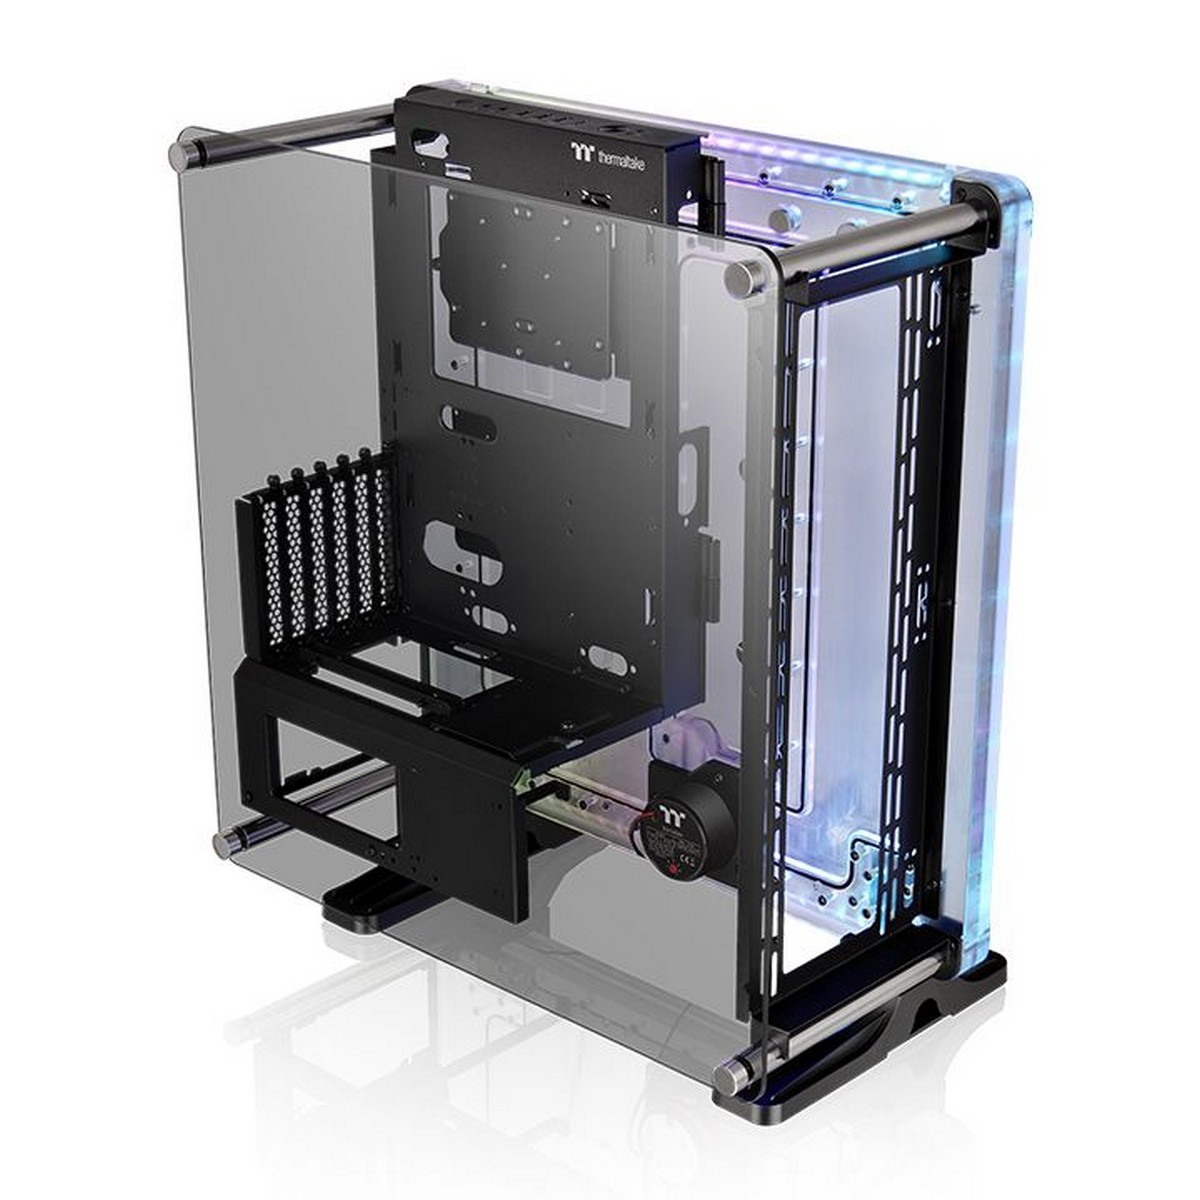 ThermalTake - Thermaltake DistroCas 350P Mid Tower Chassis